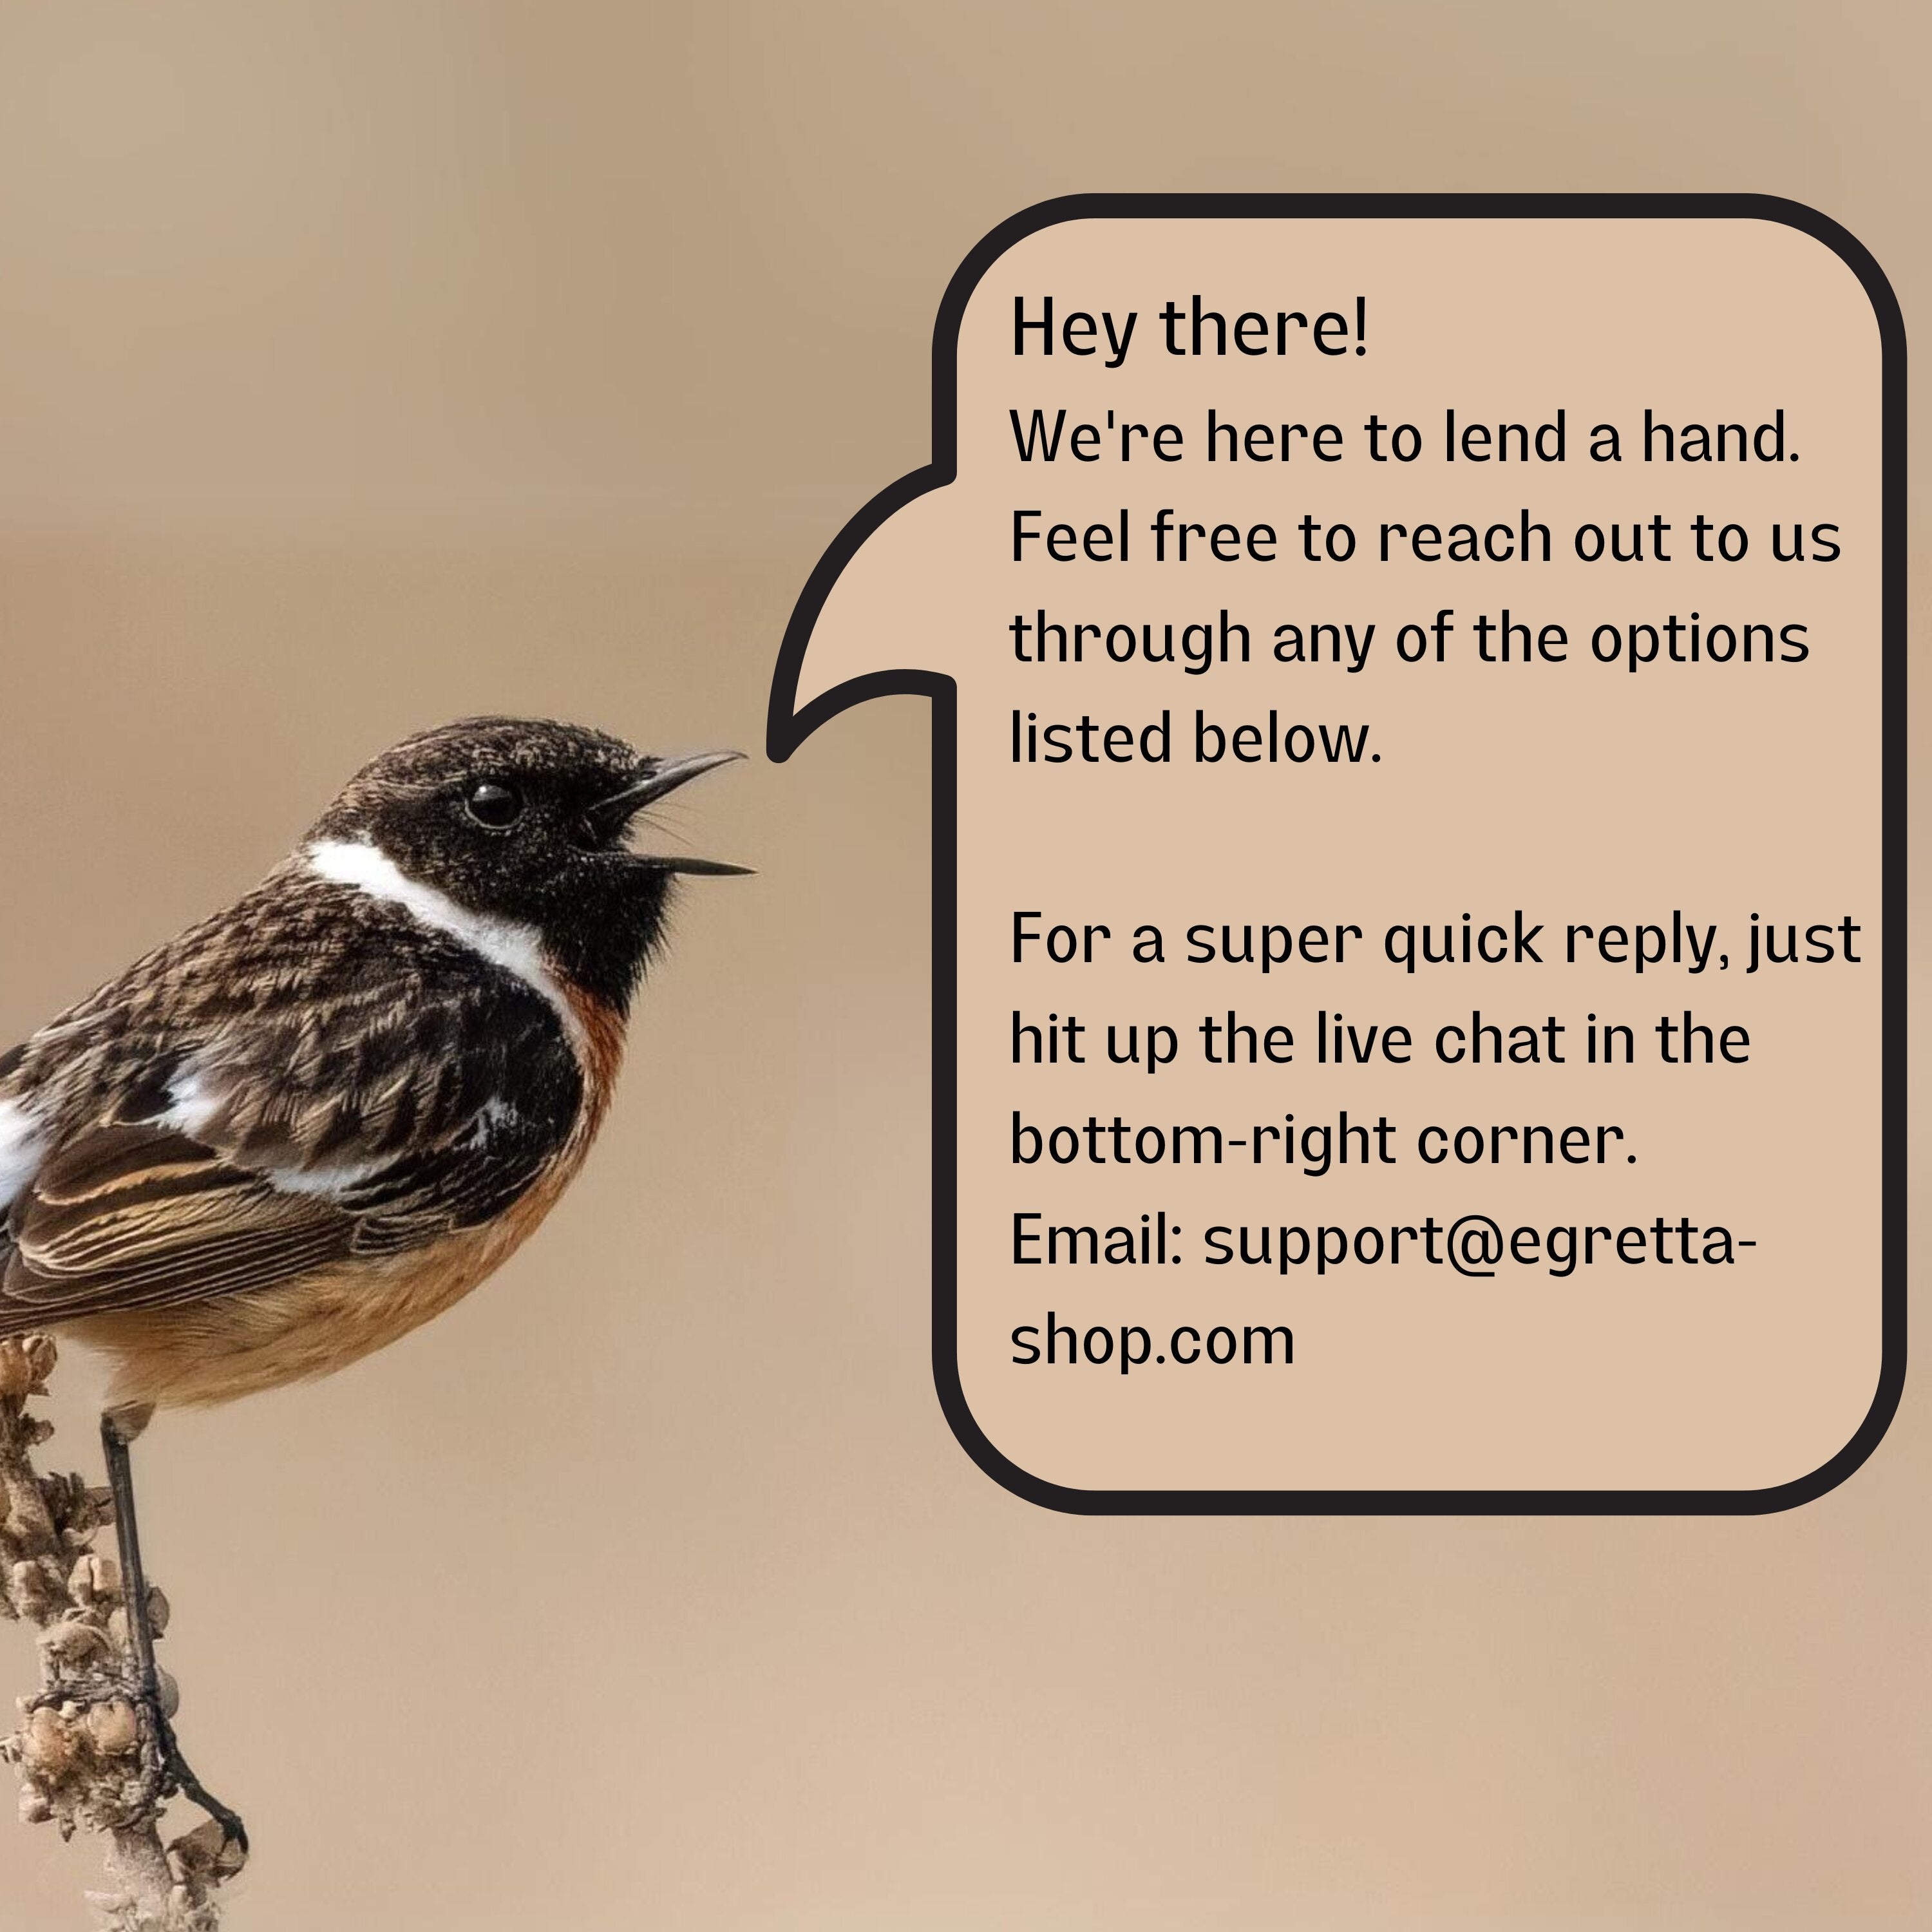 European stonechat is singing the contact info of Egretta.